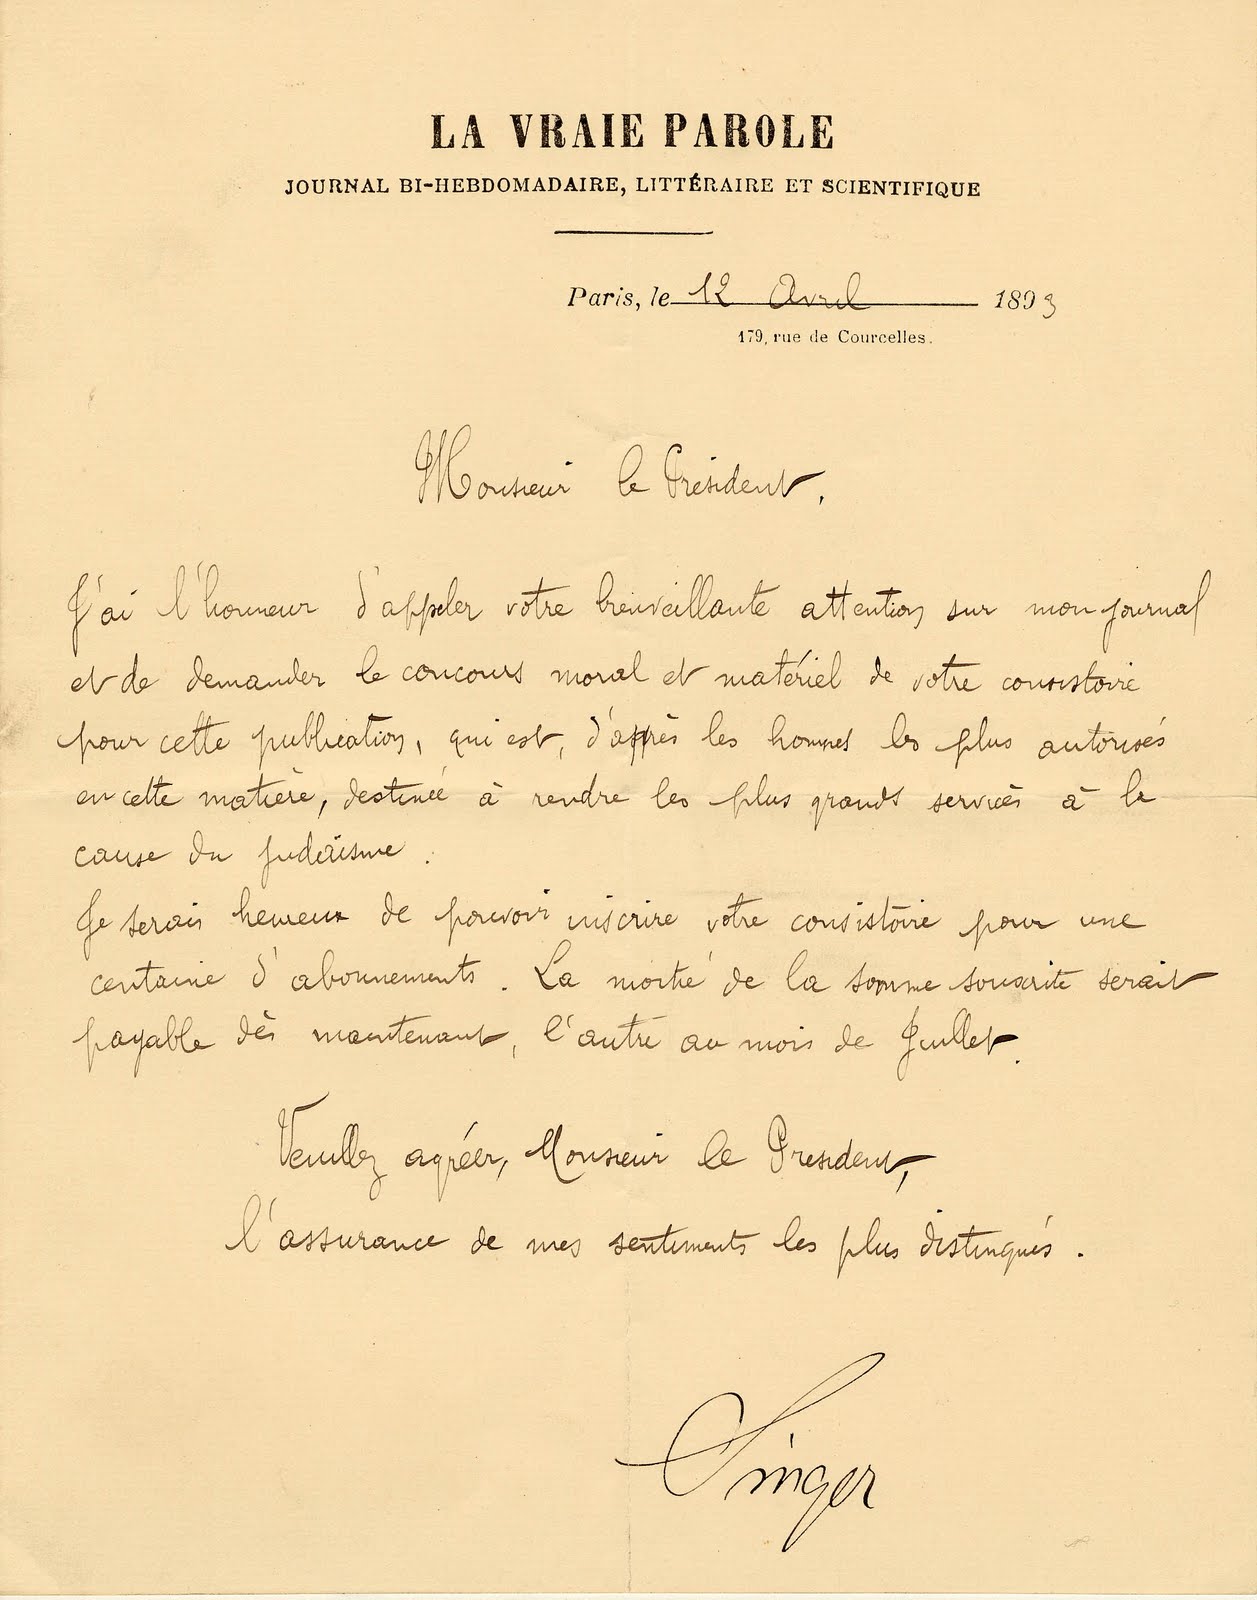 a handwritten “Allocution” addressed to the president of the Central Consistory by Isadore Singer, La Vraie Parole